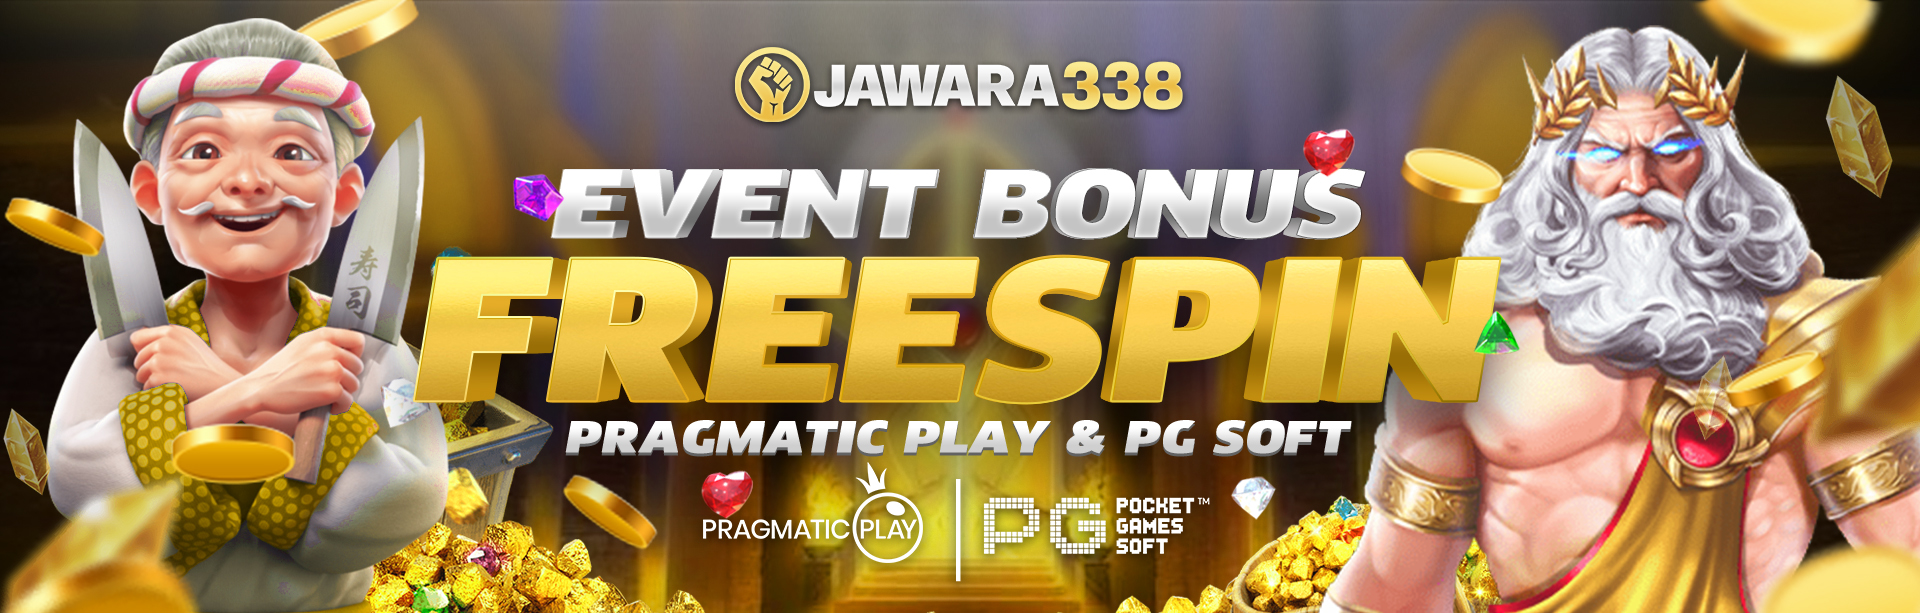 EVENT FREESPIN